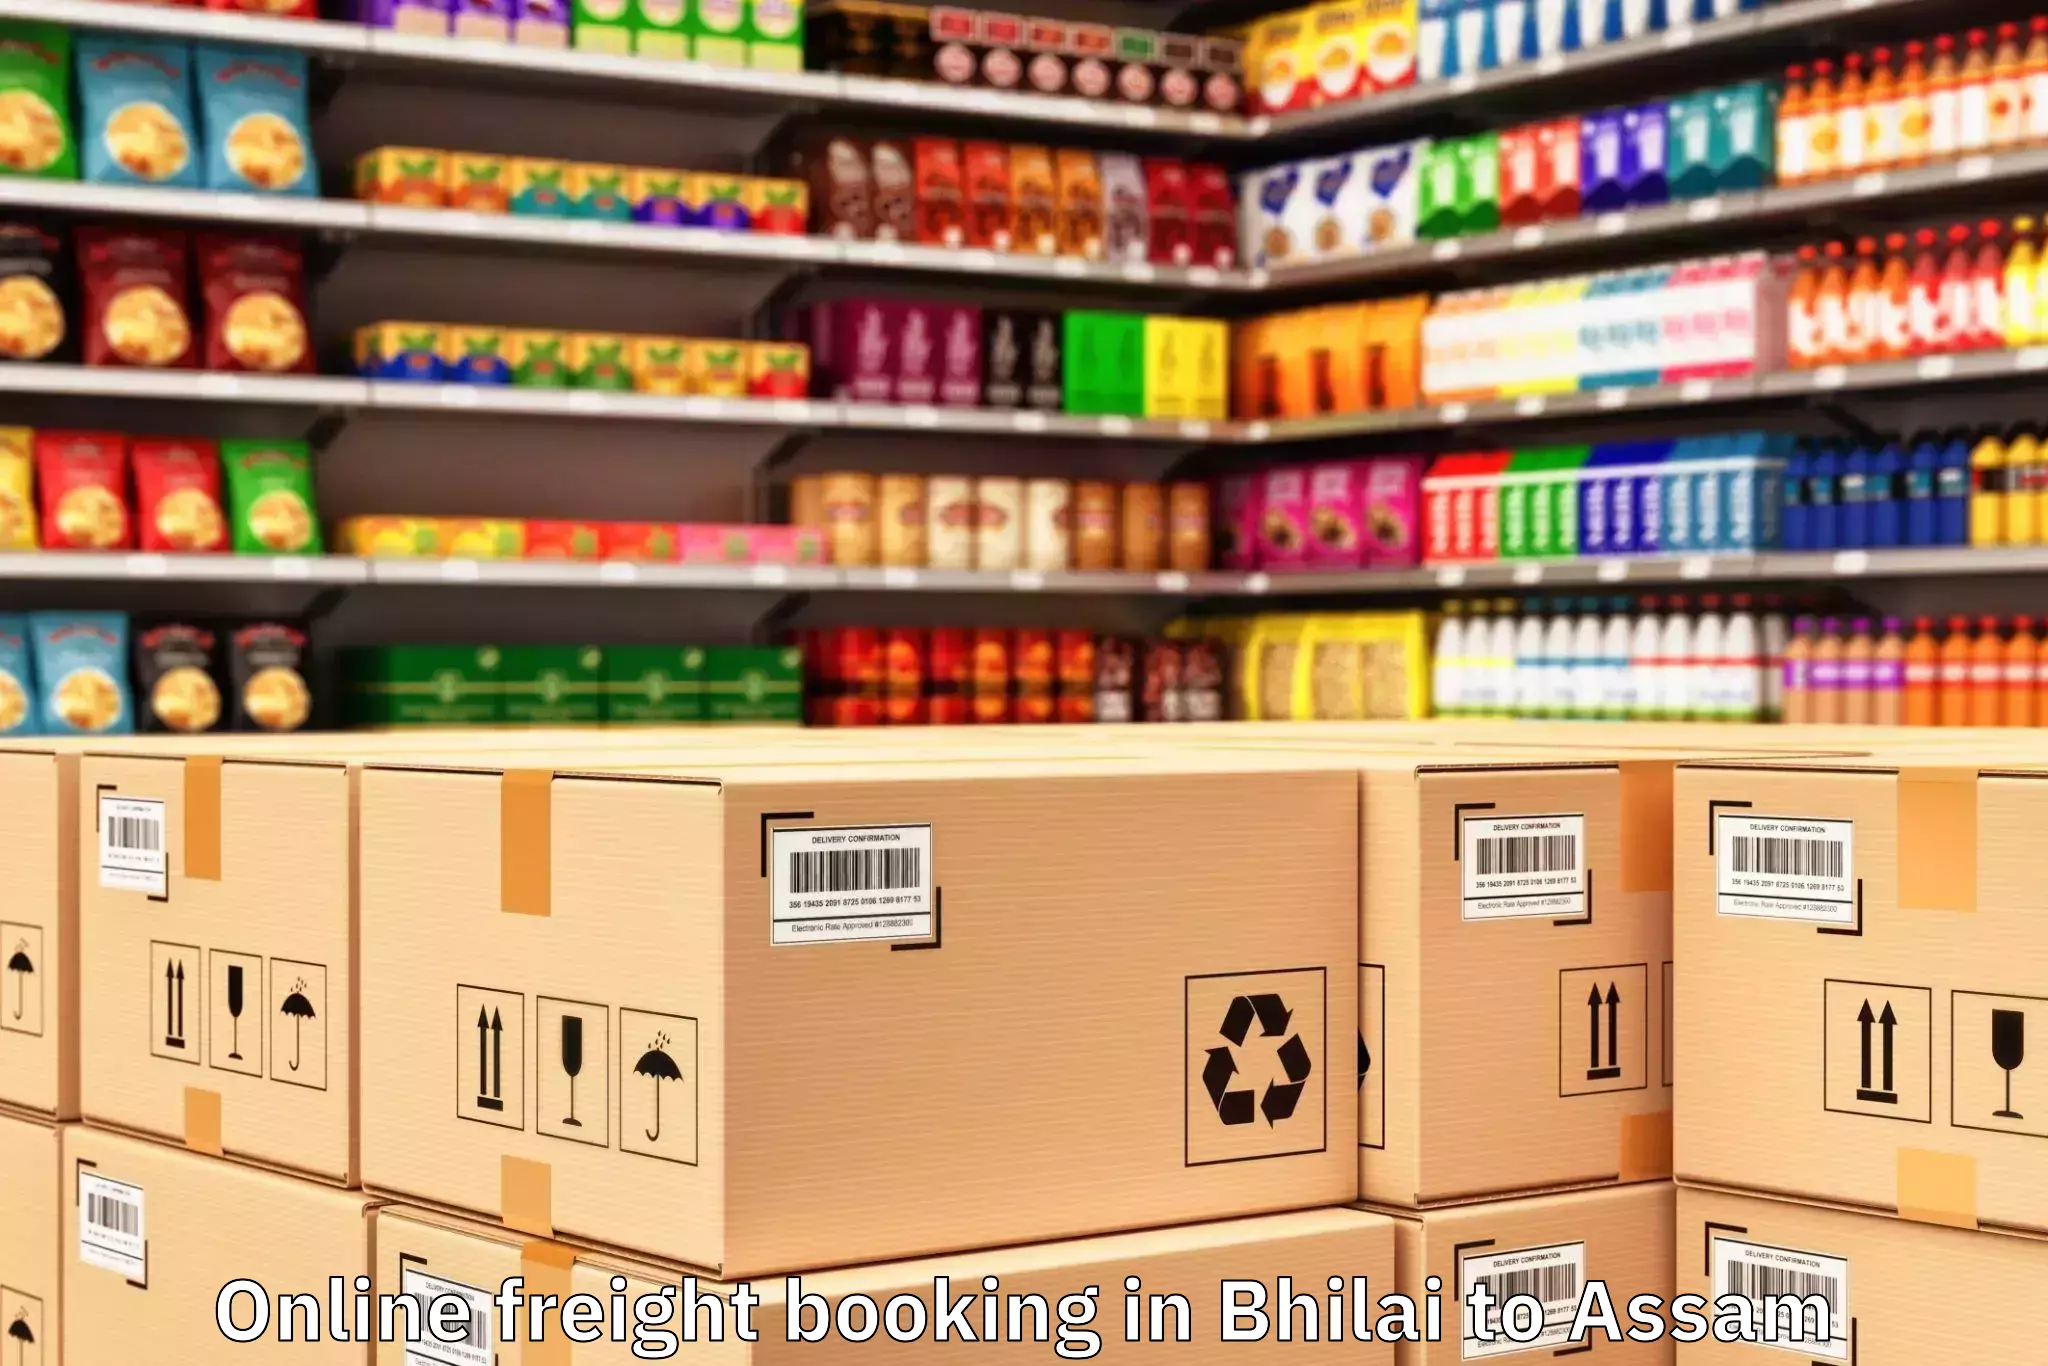 Top Bhilai to Duliajan Online Freight Booking Available